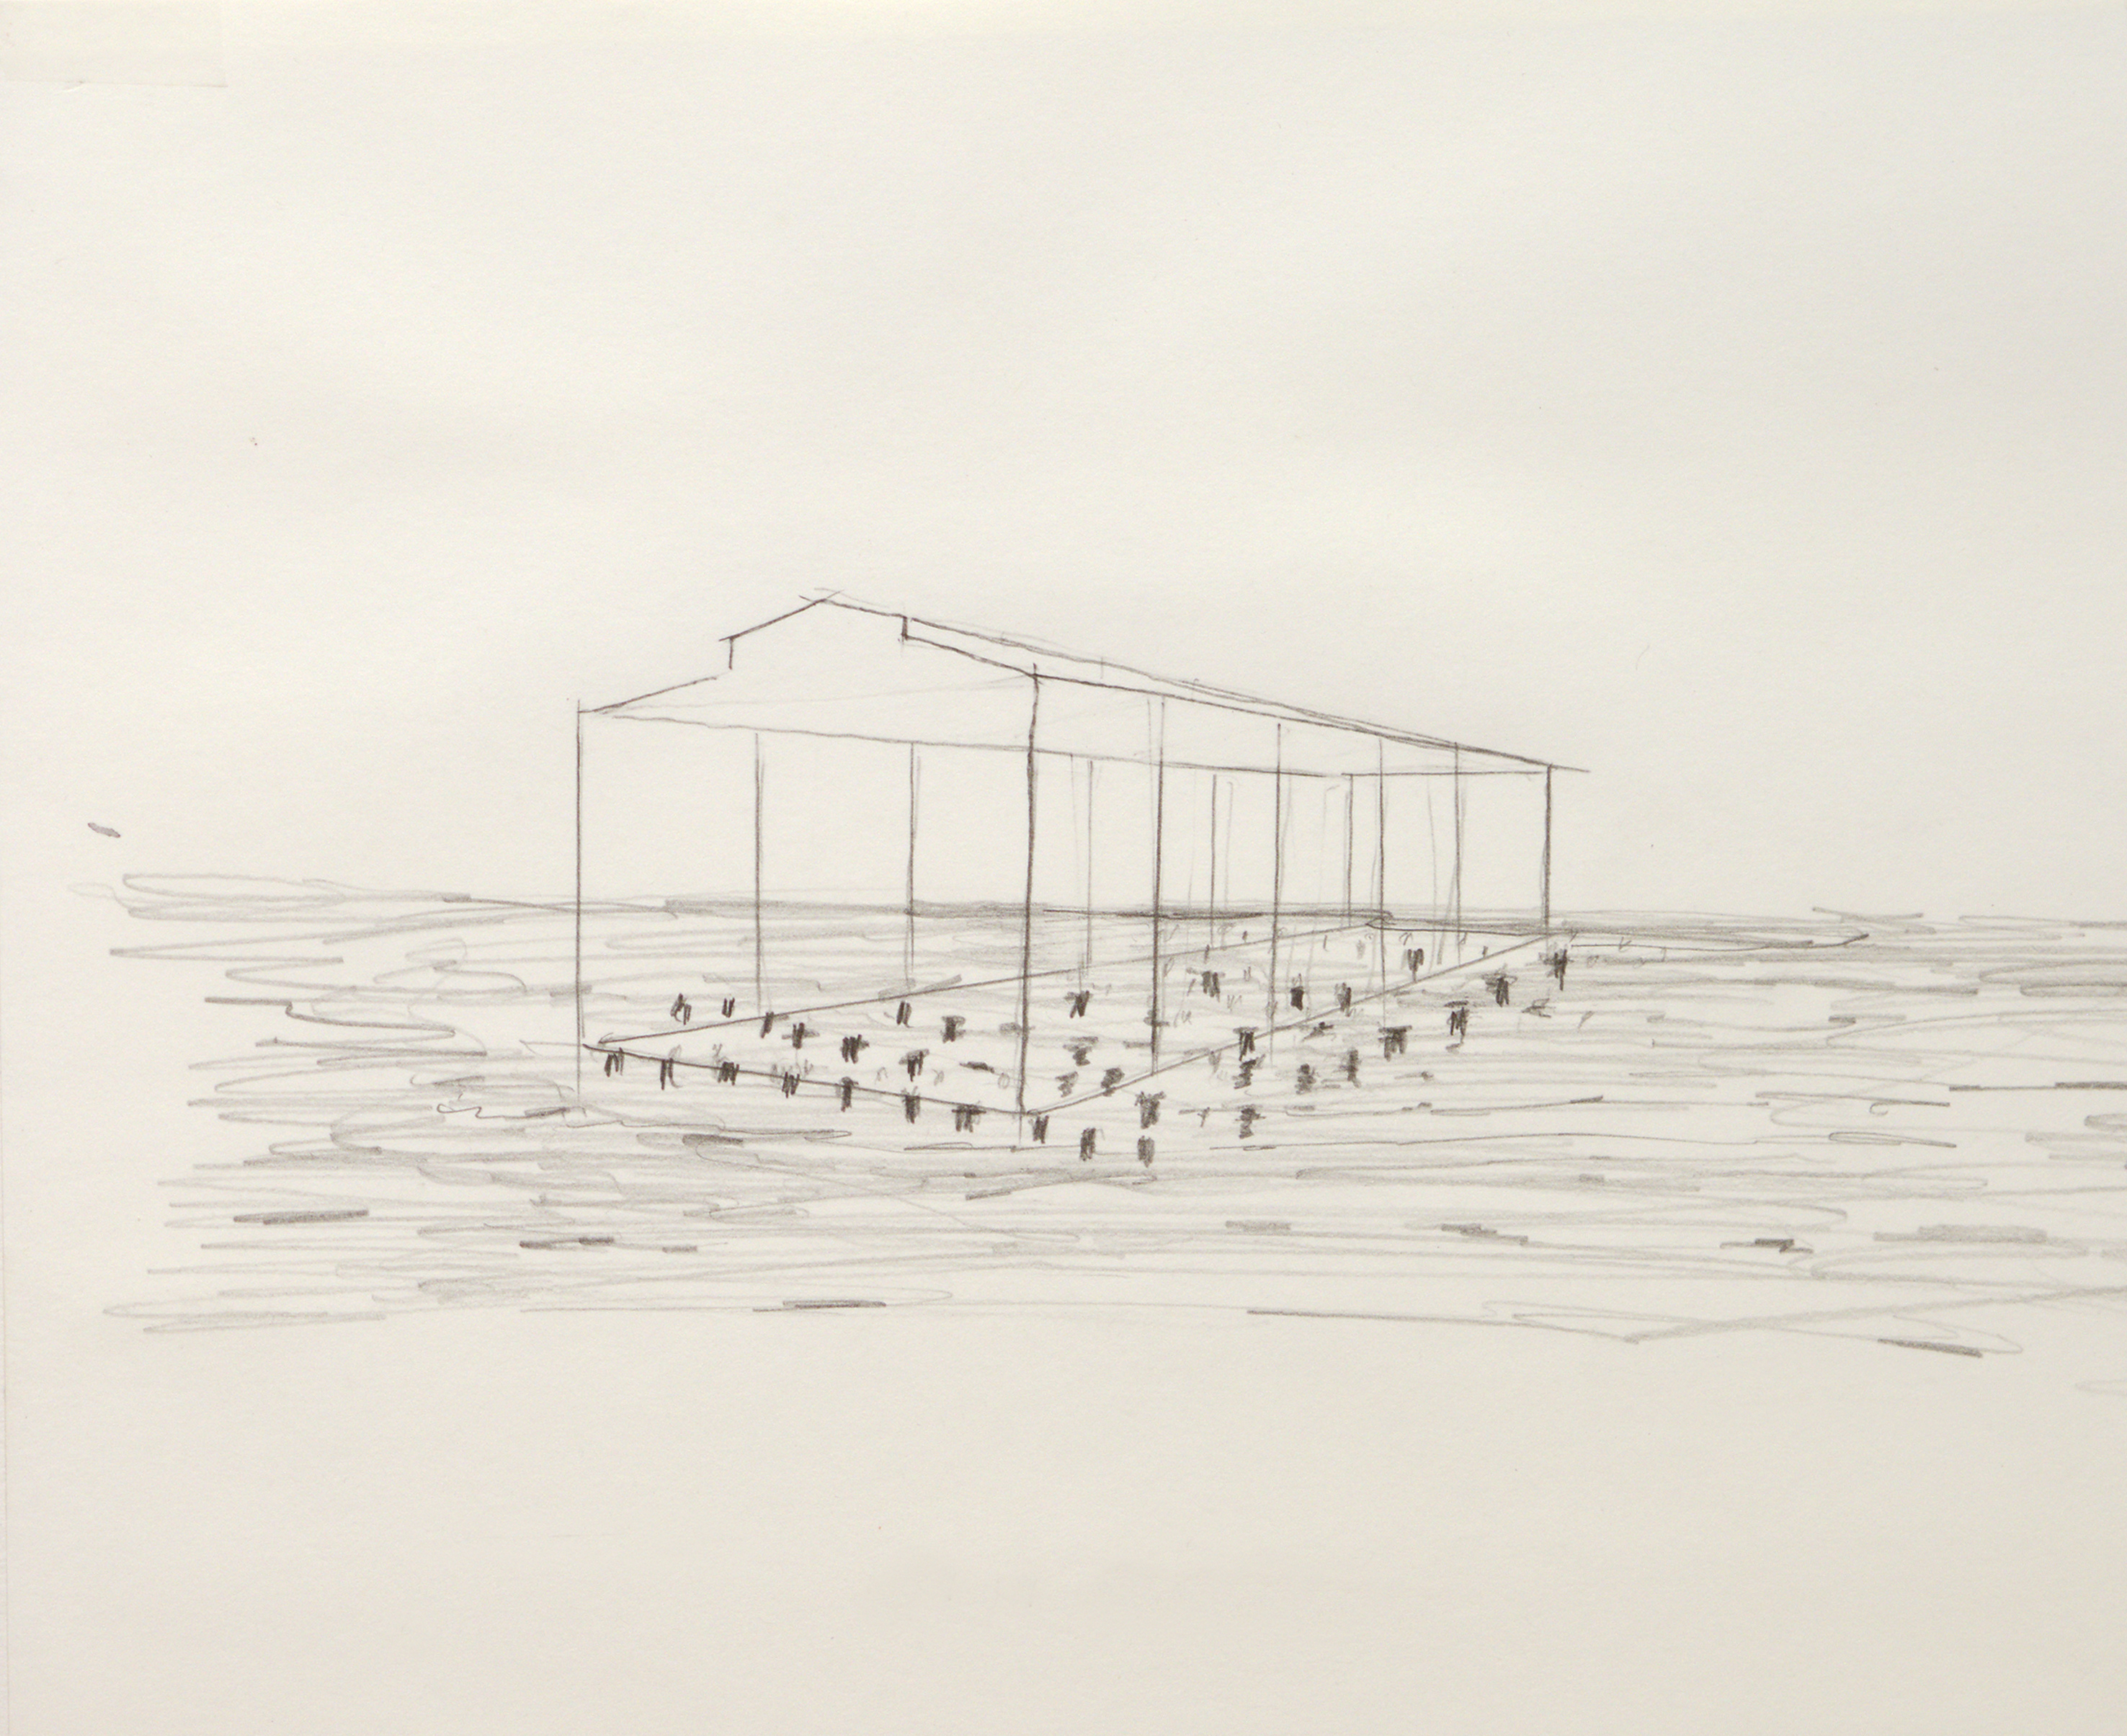 David Hammons (b. 1943), Sketch for Day's End, a proposed public art project. 